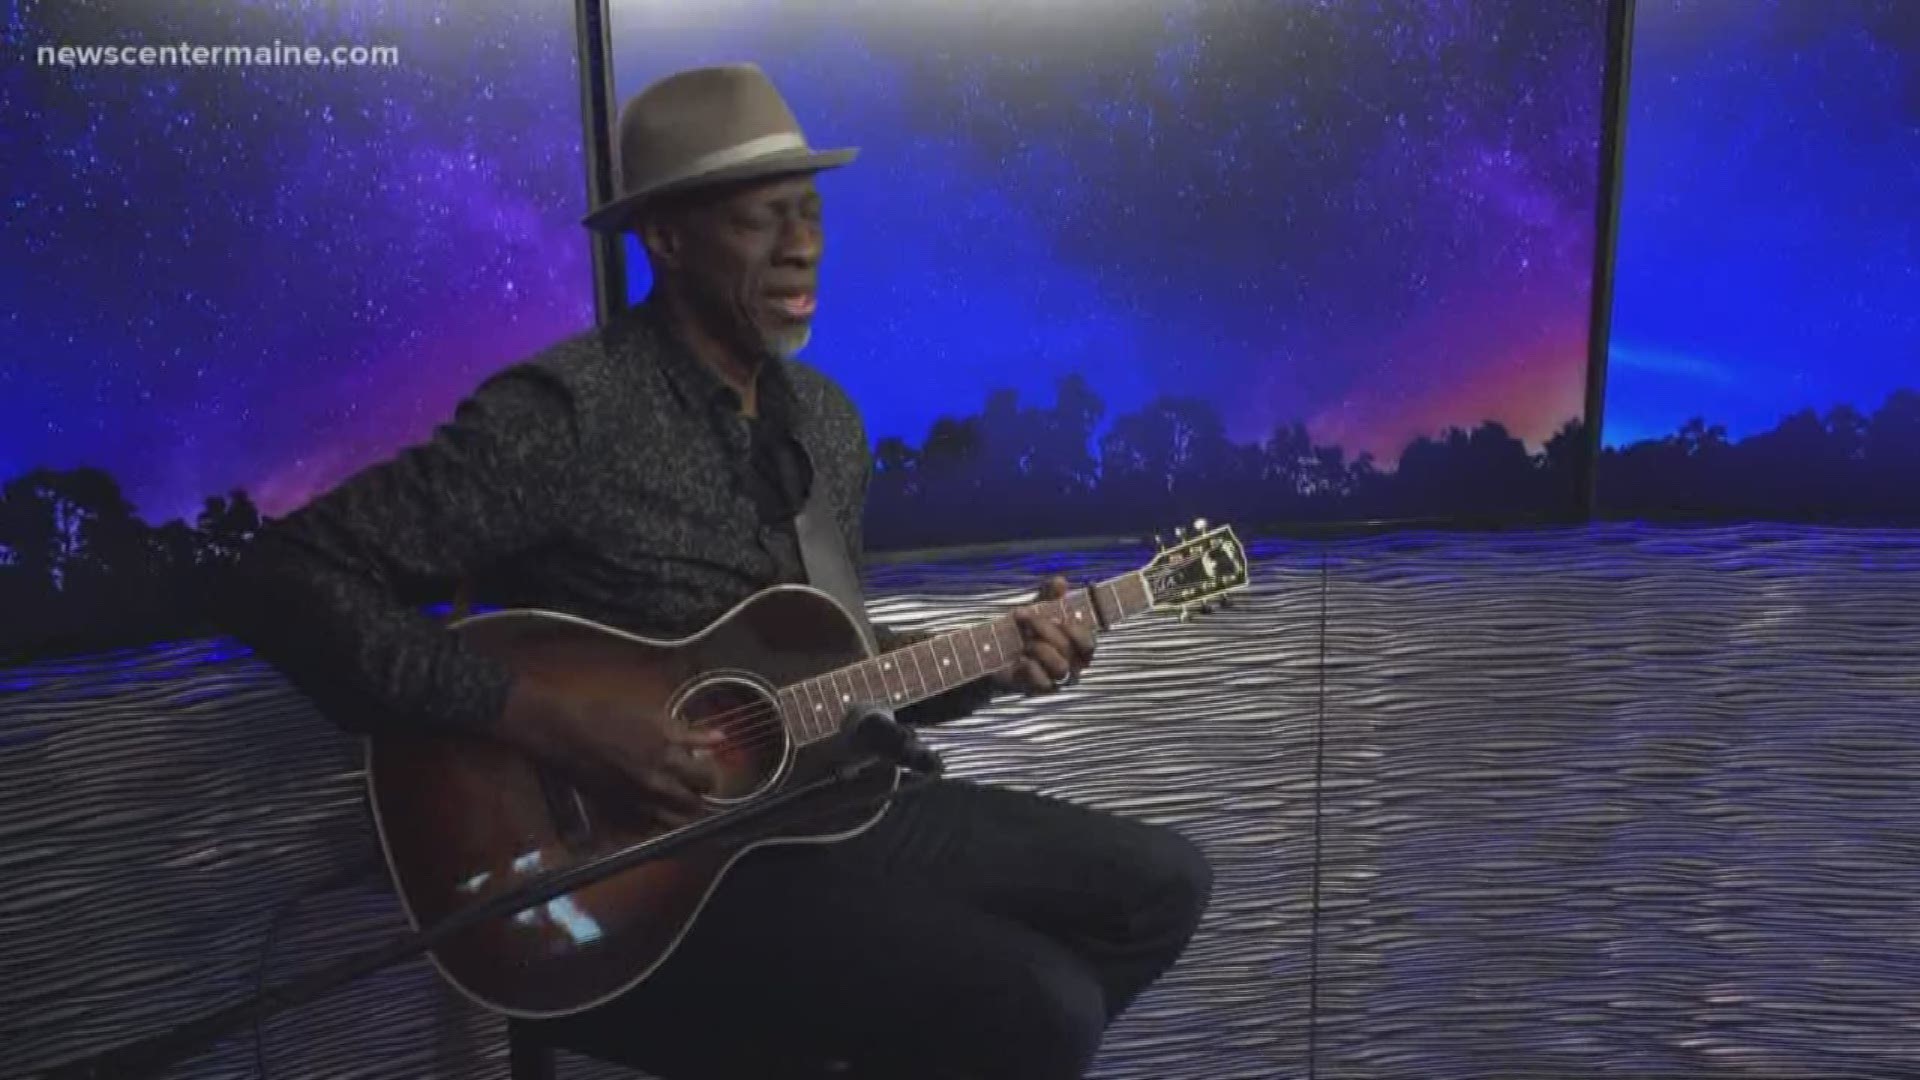 Grammy winner Keb' Mo' performs "One Friend" in our newsroom.